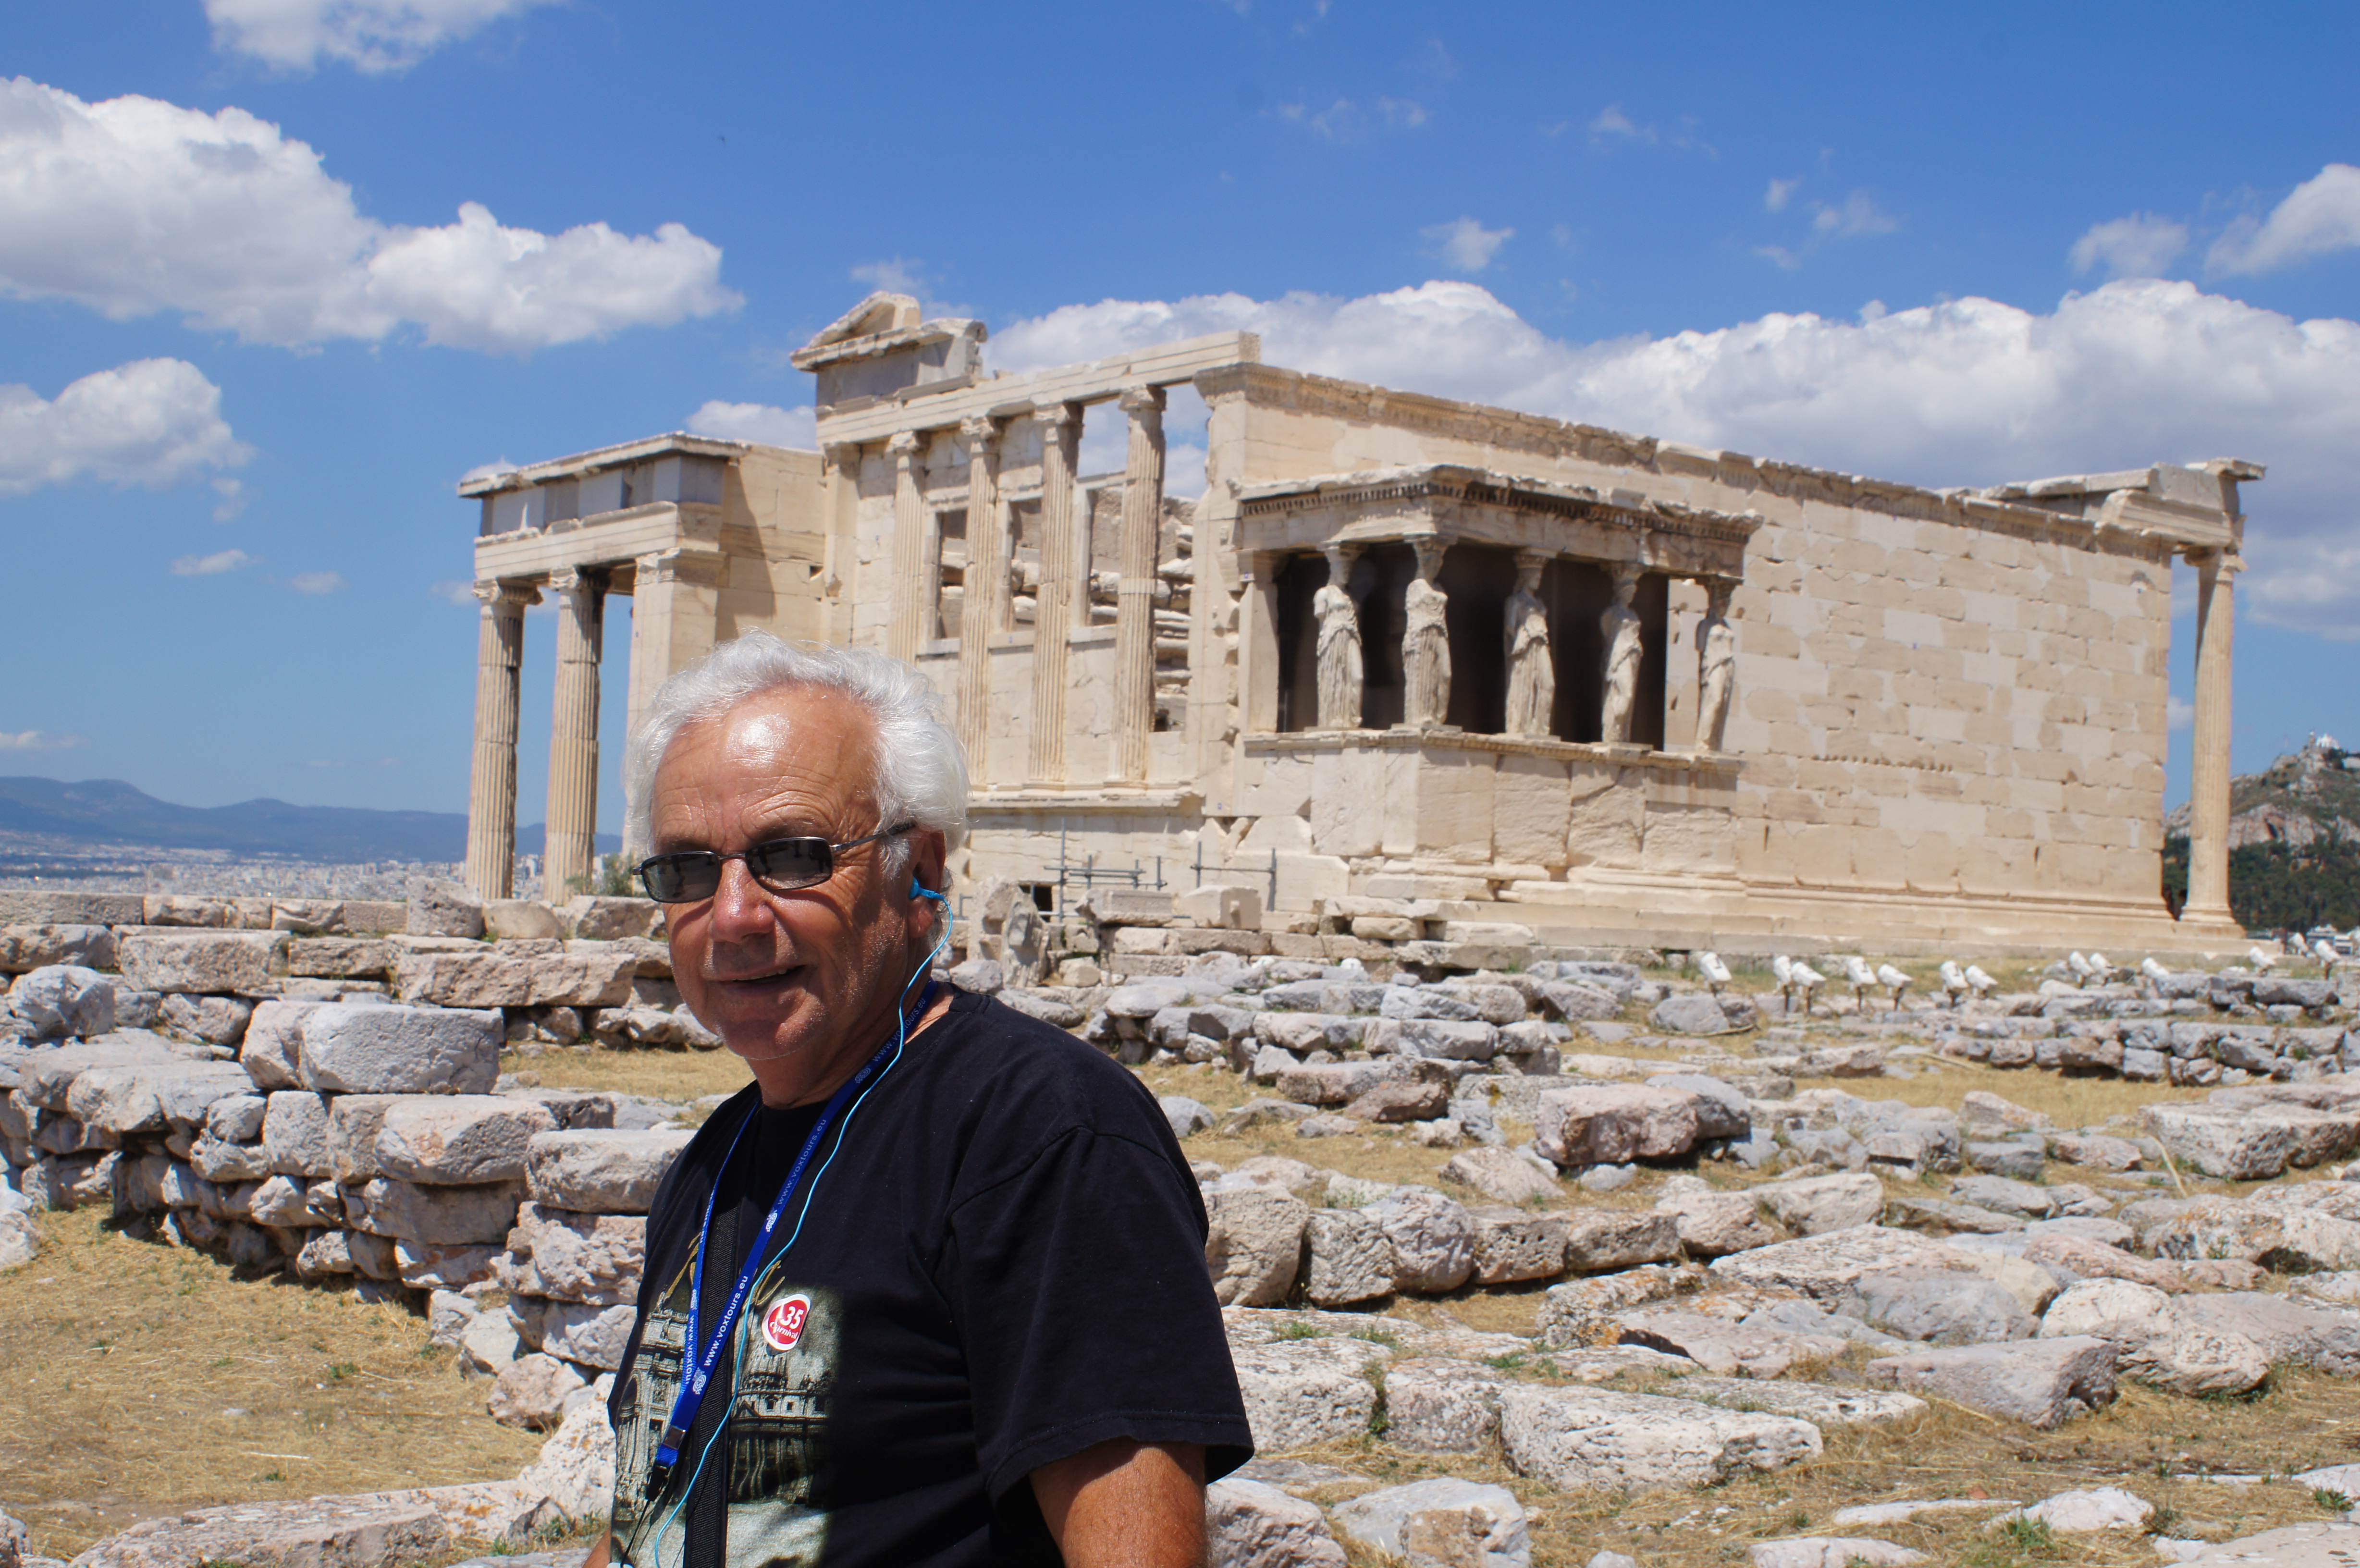 Mr Mello Vacations at the Acropolis
